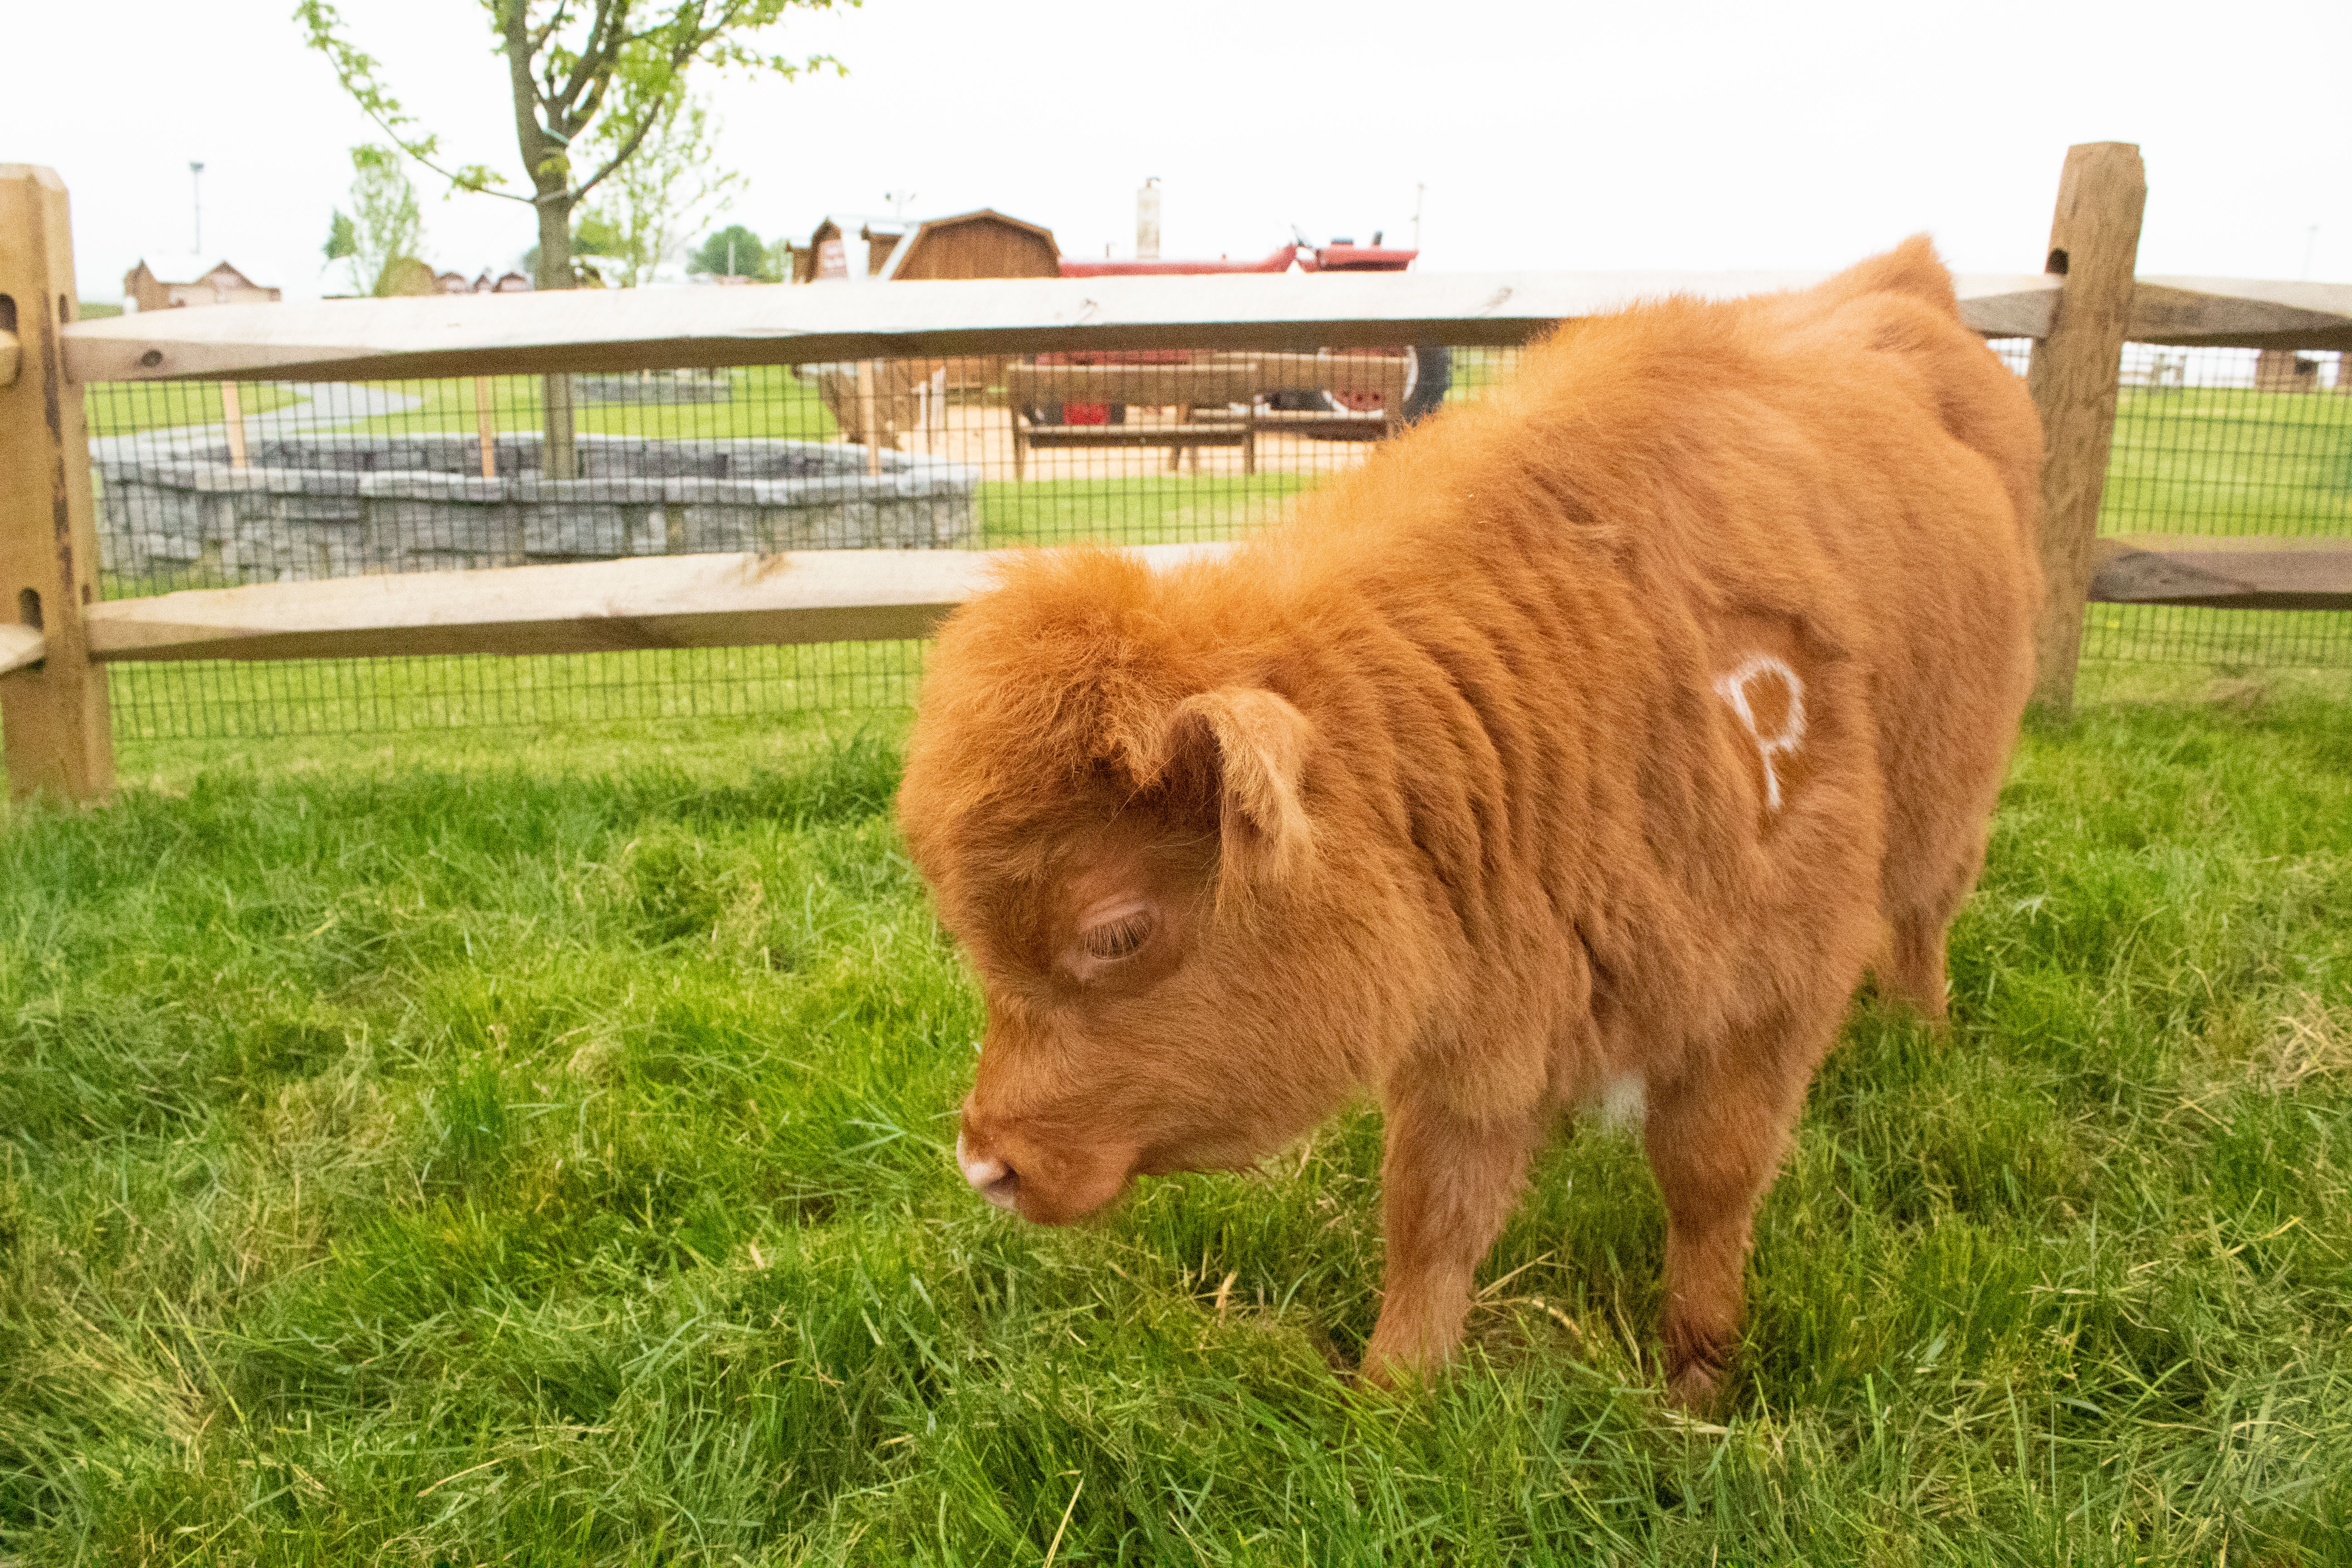 Highland cattle on the rise as an easy breed to handle - Agweek